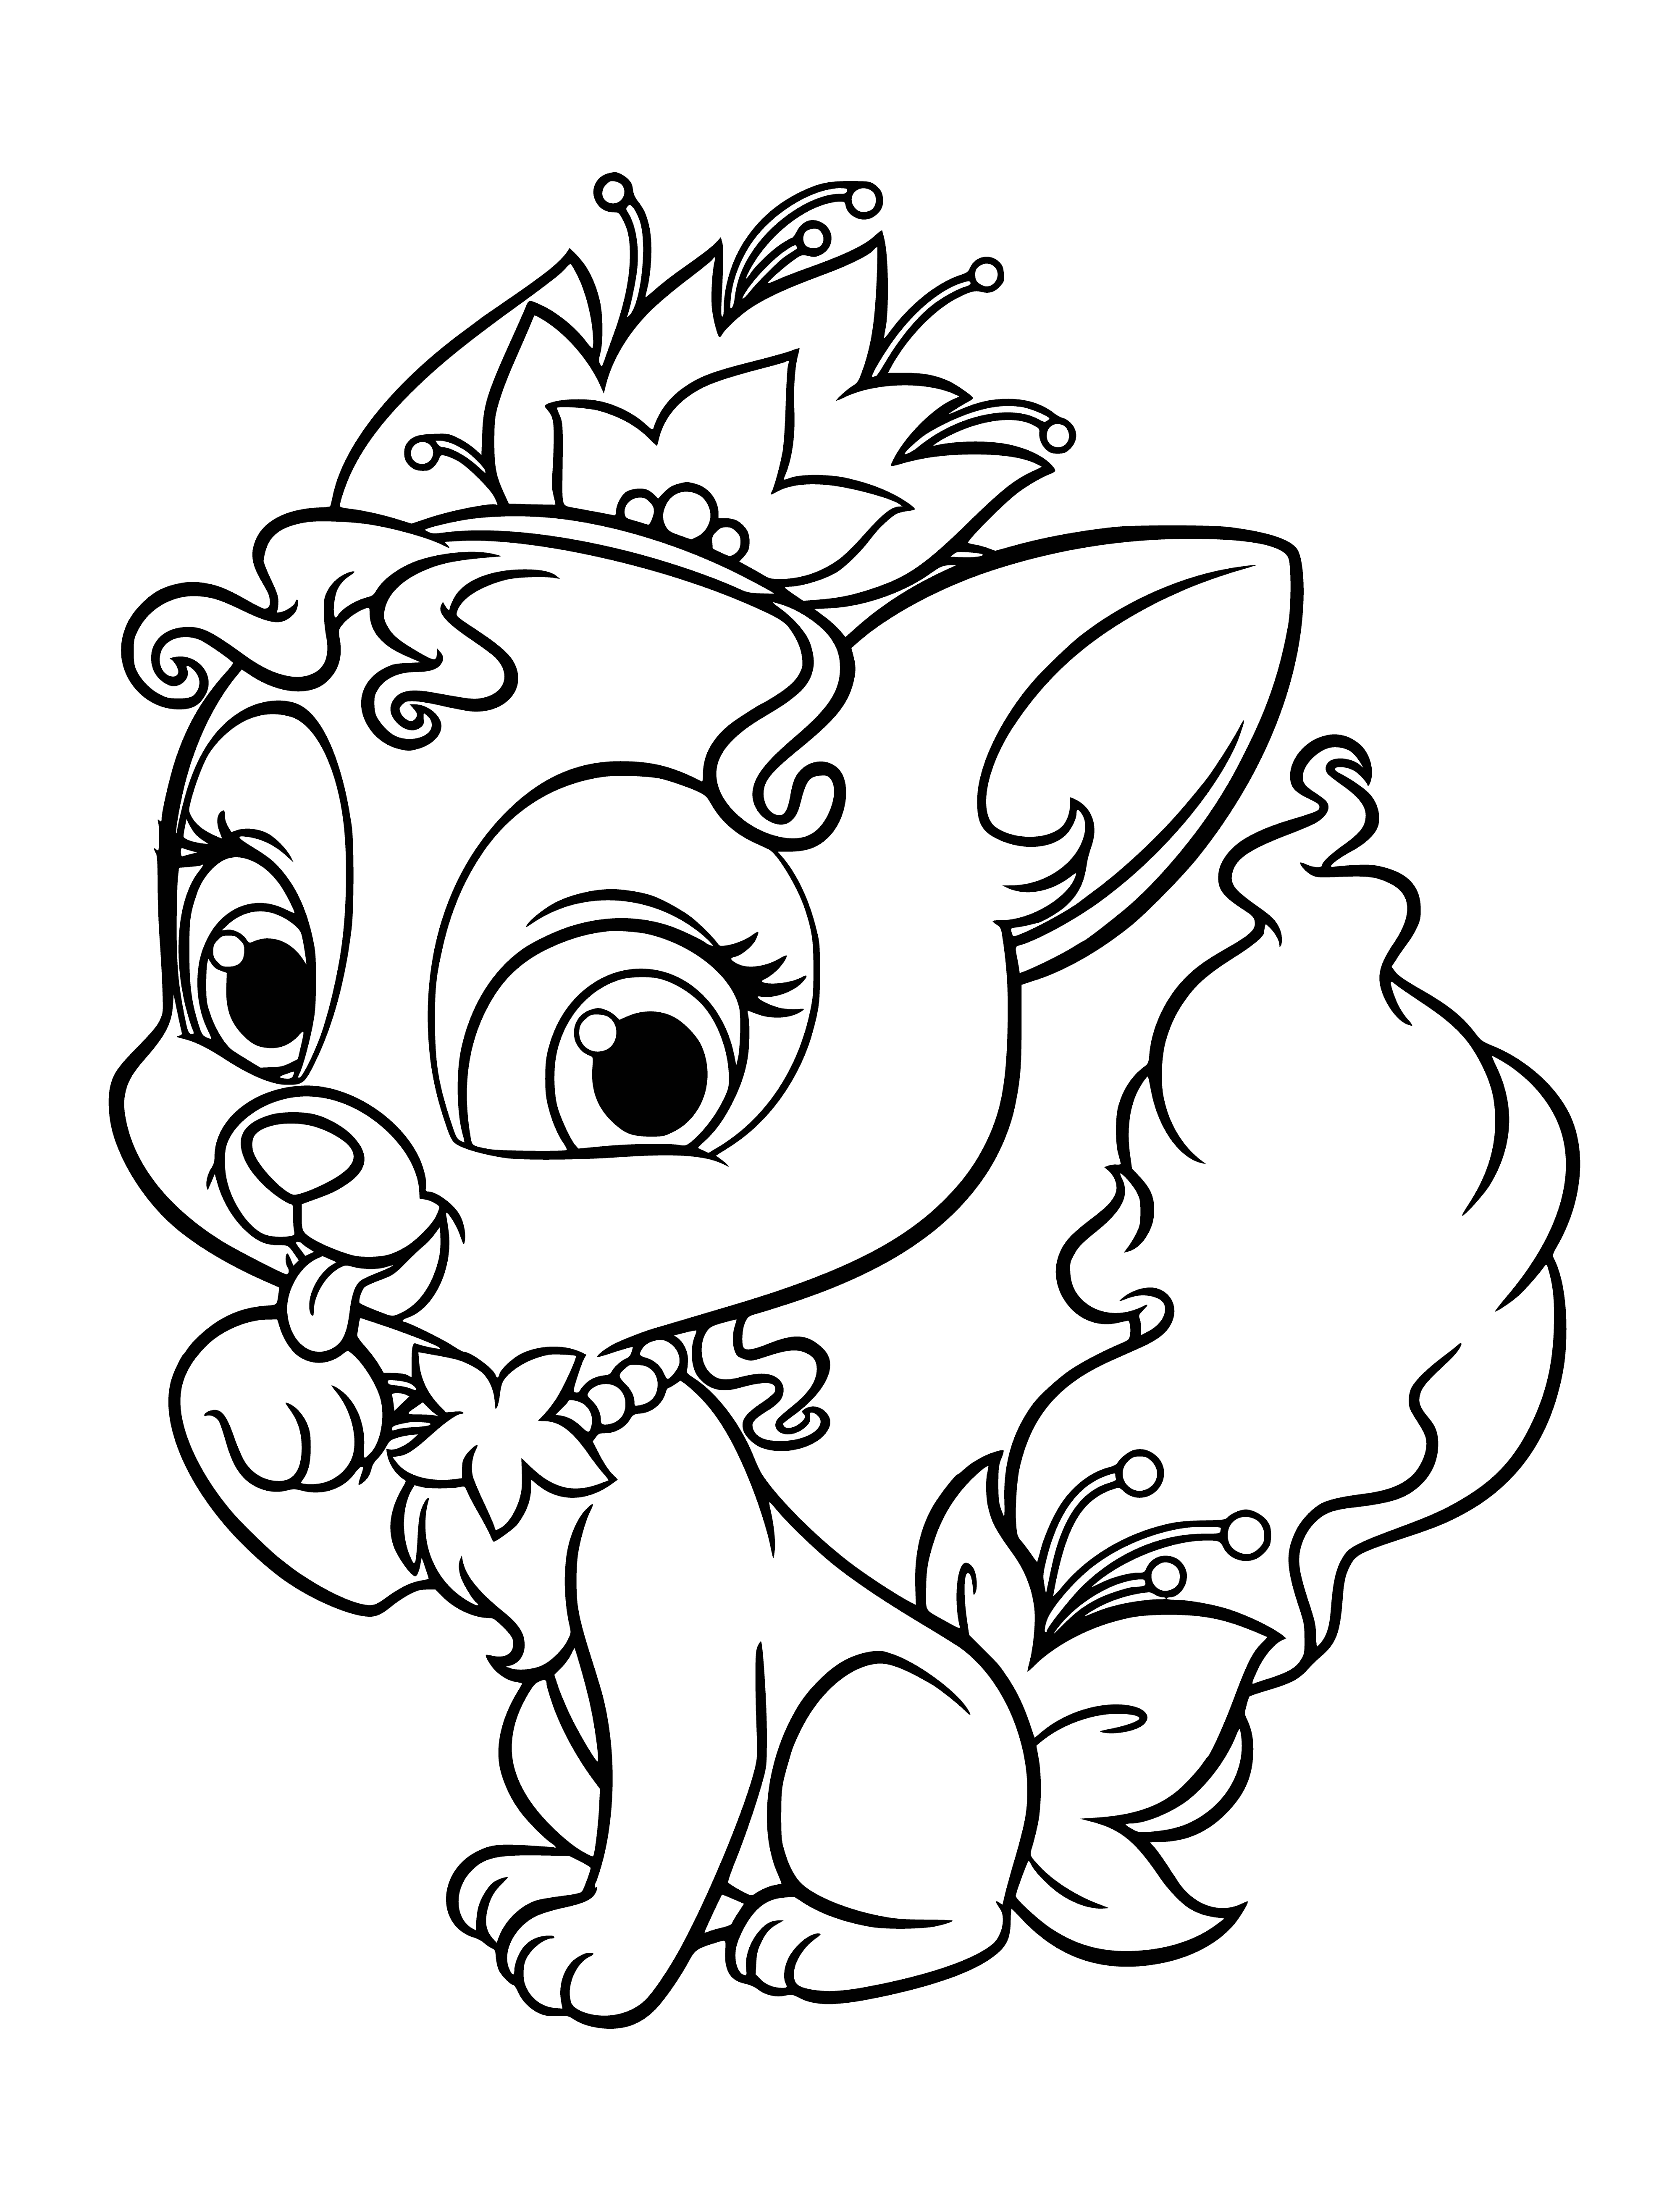 Lily;s kitten. Princess Tiana's pet coloring page